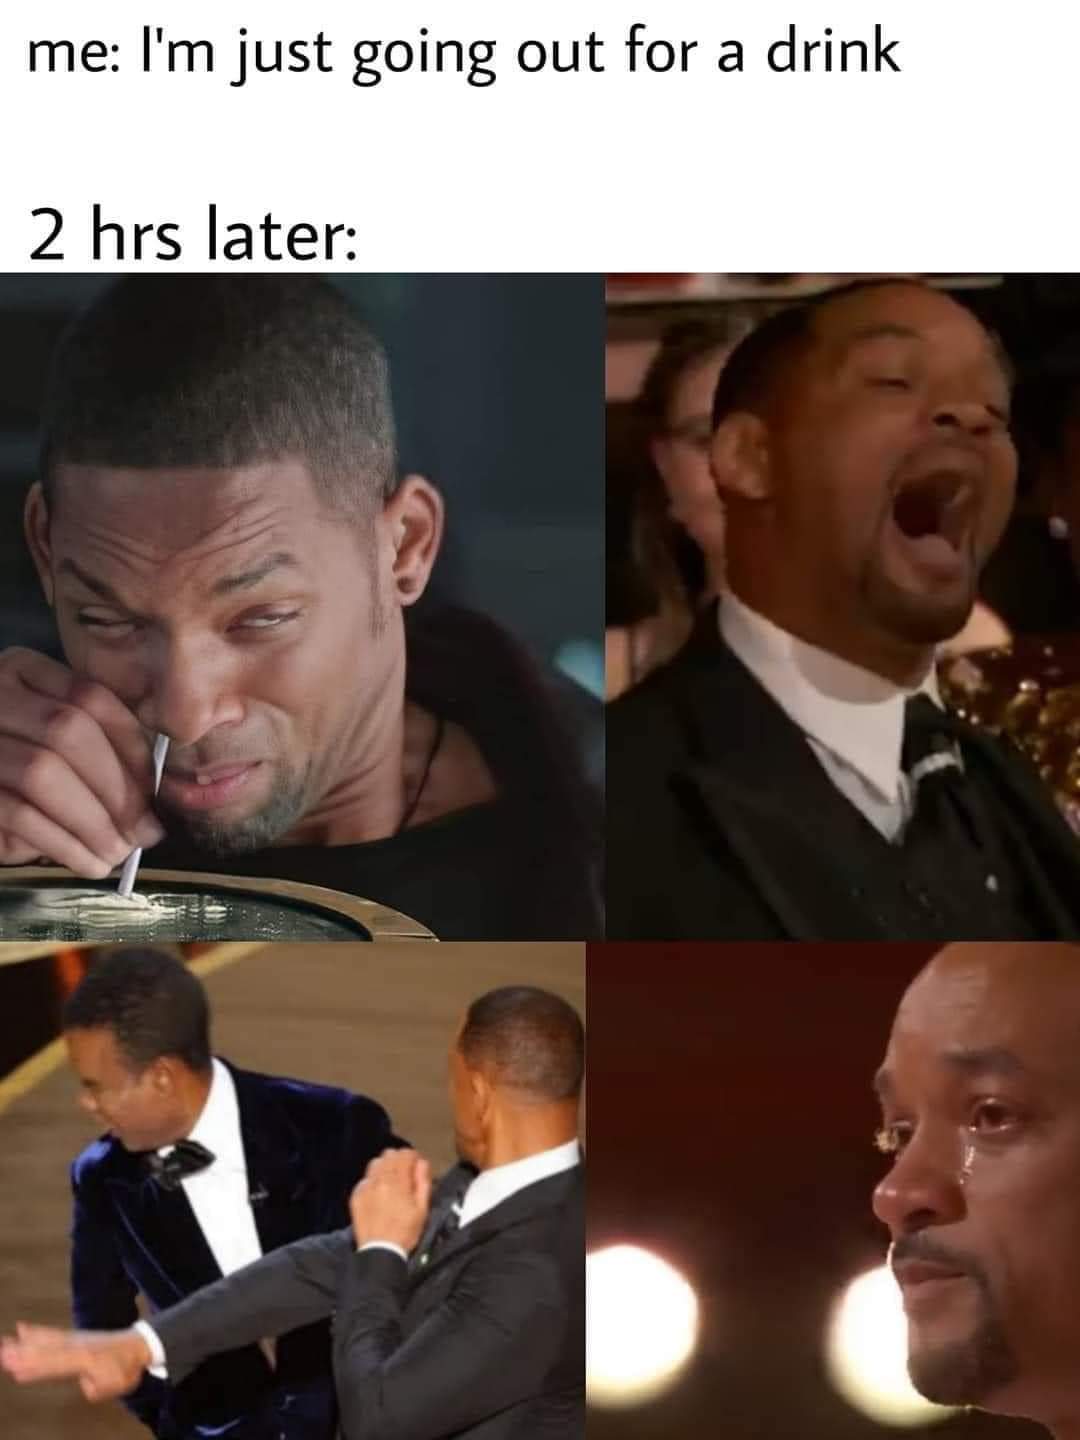 will_smith_just_going_out_for_a_drink.jpg